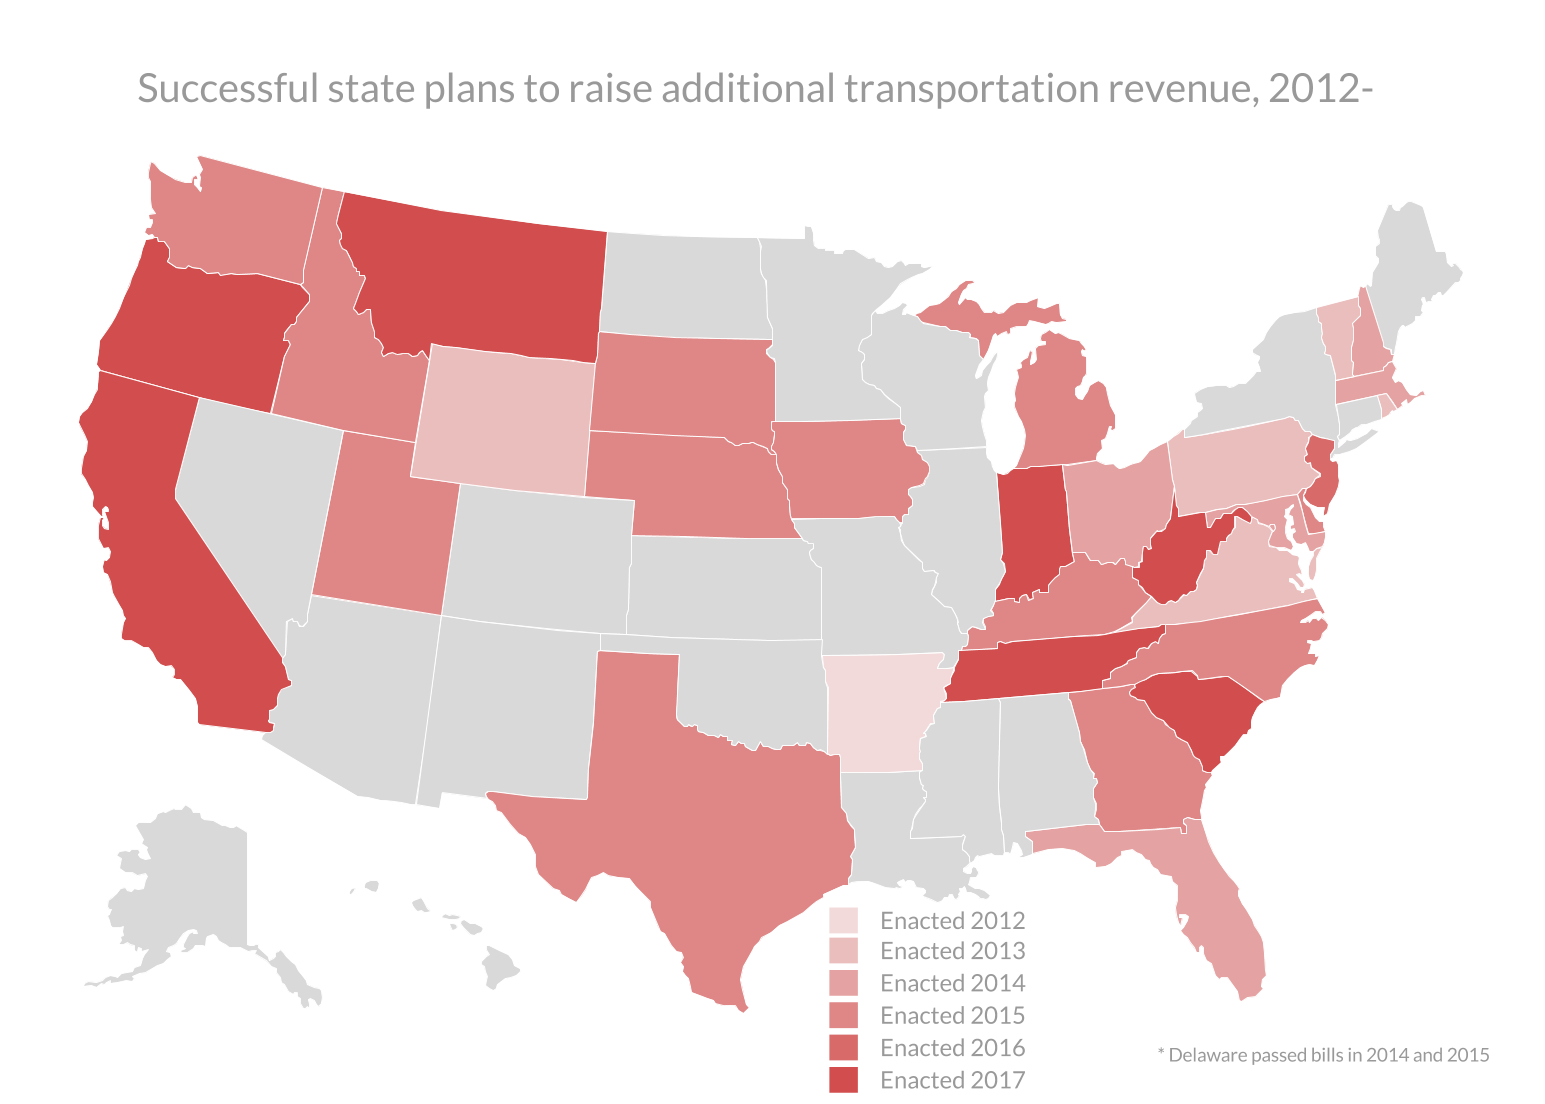 Successful state plans to raise additional transportation revenue, 2012-